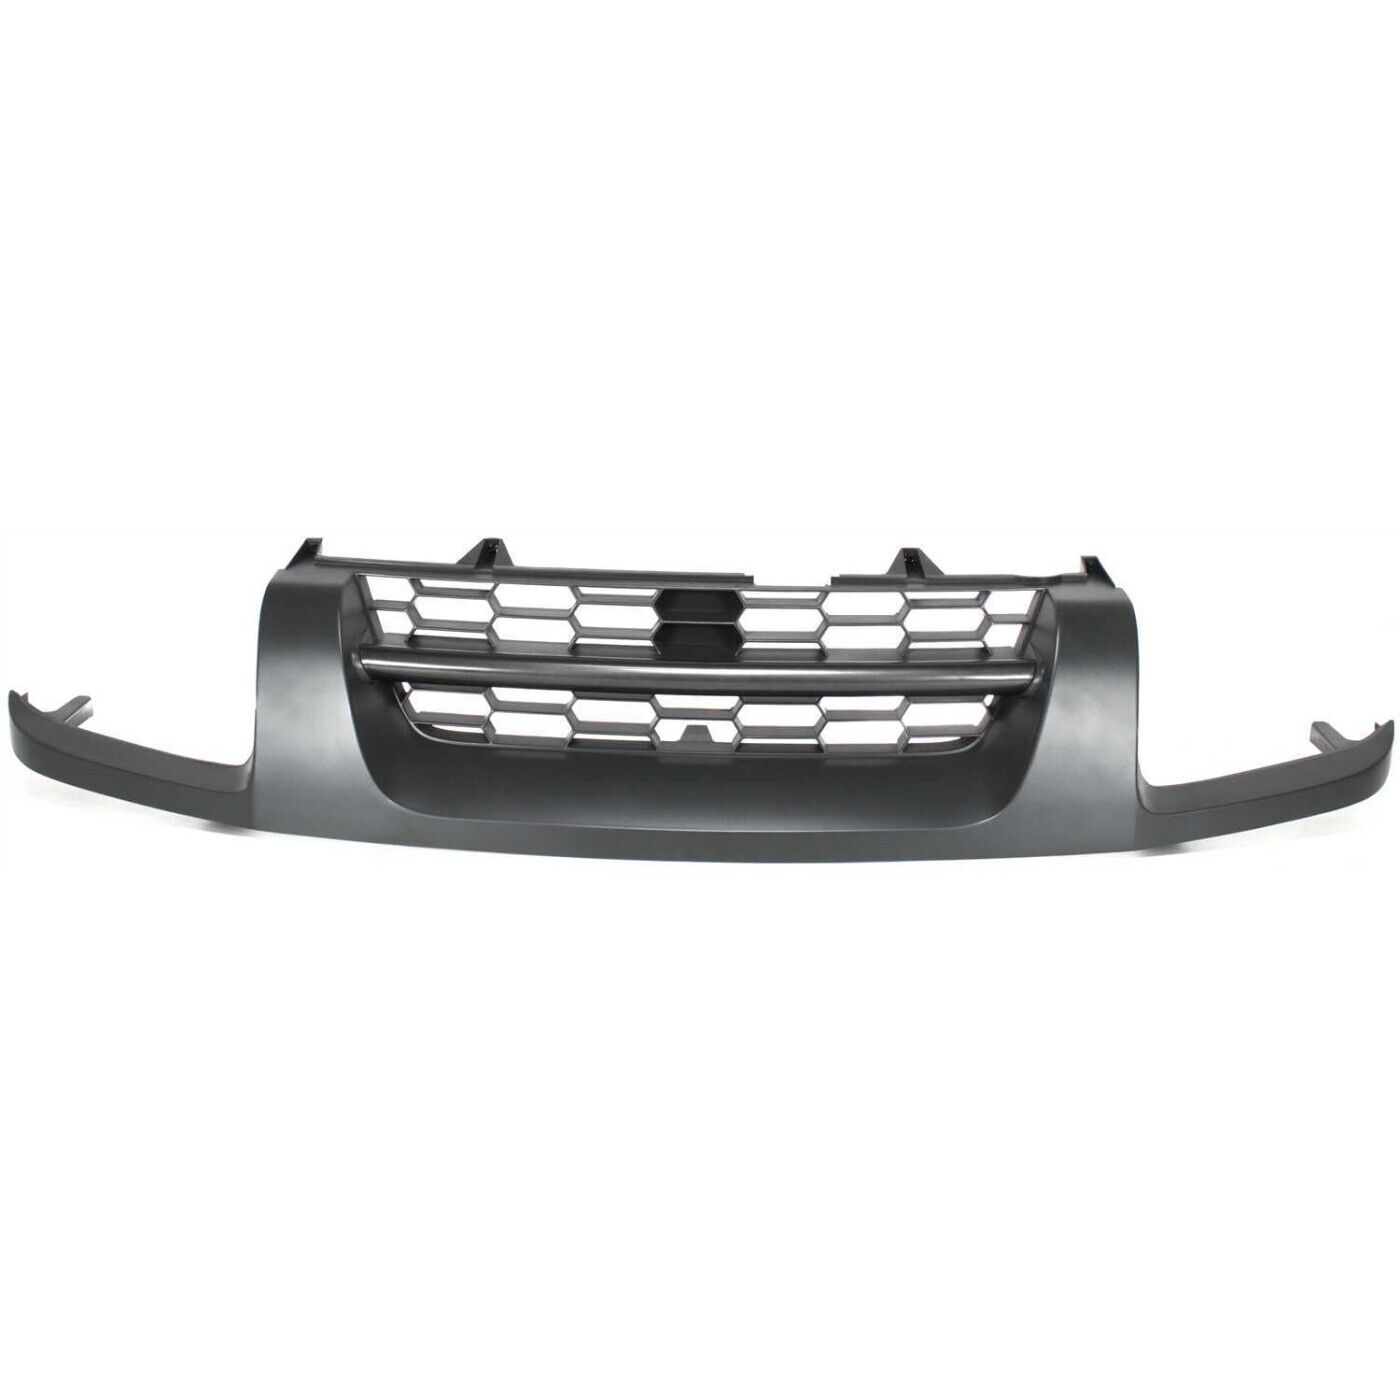 Grille For 2002-2004 Nissan Xterra Gray Plastic